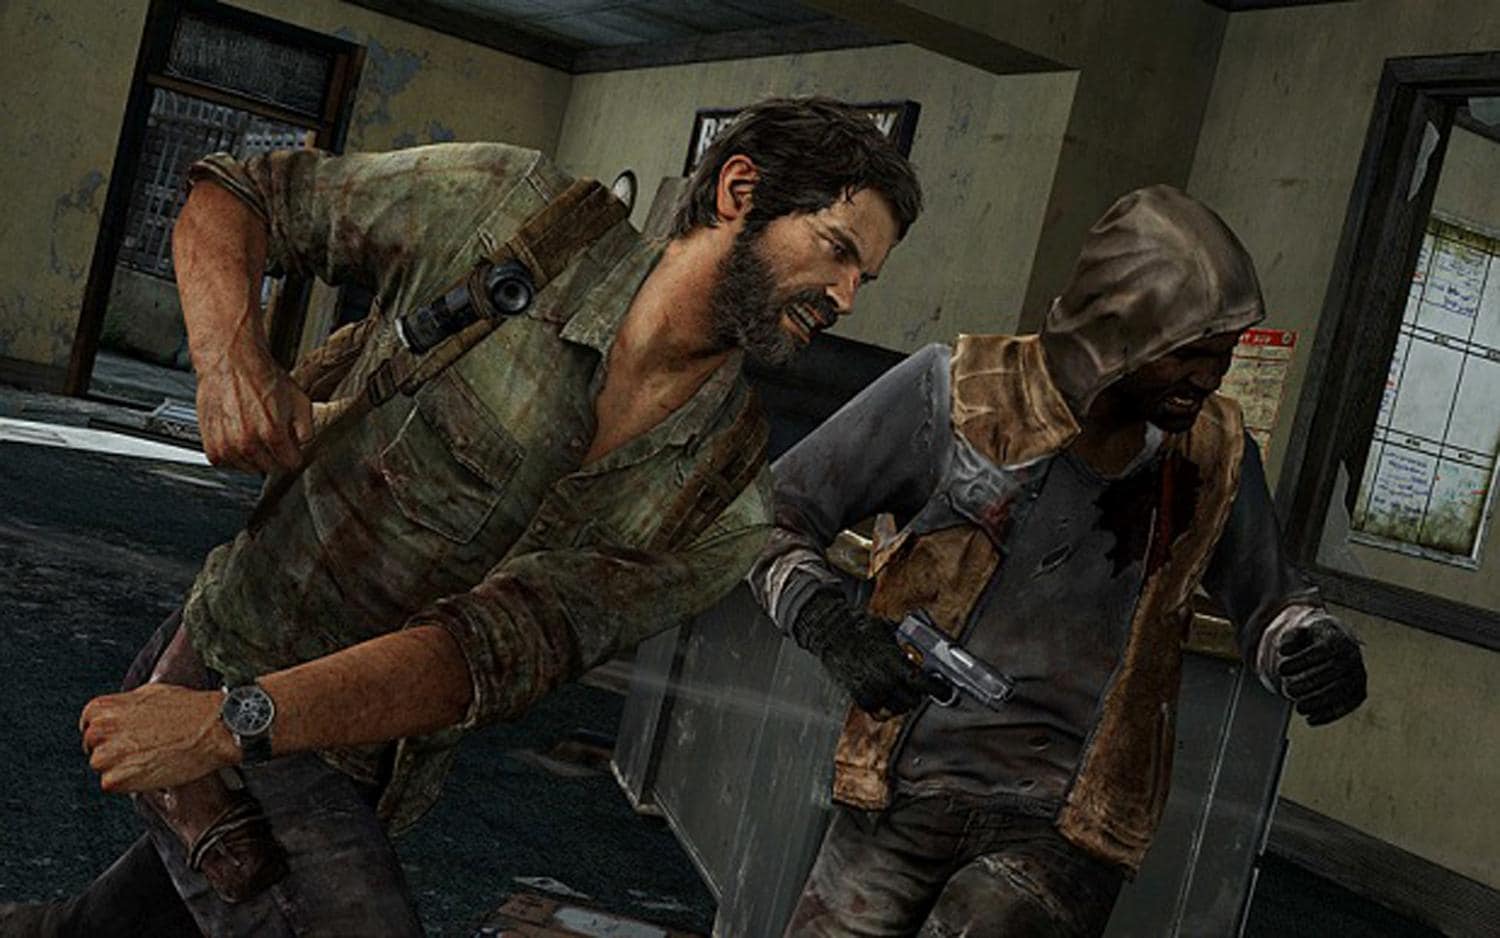 Metacritic Users Recognises The Last Of Us As Game Of The Decade